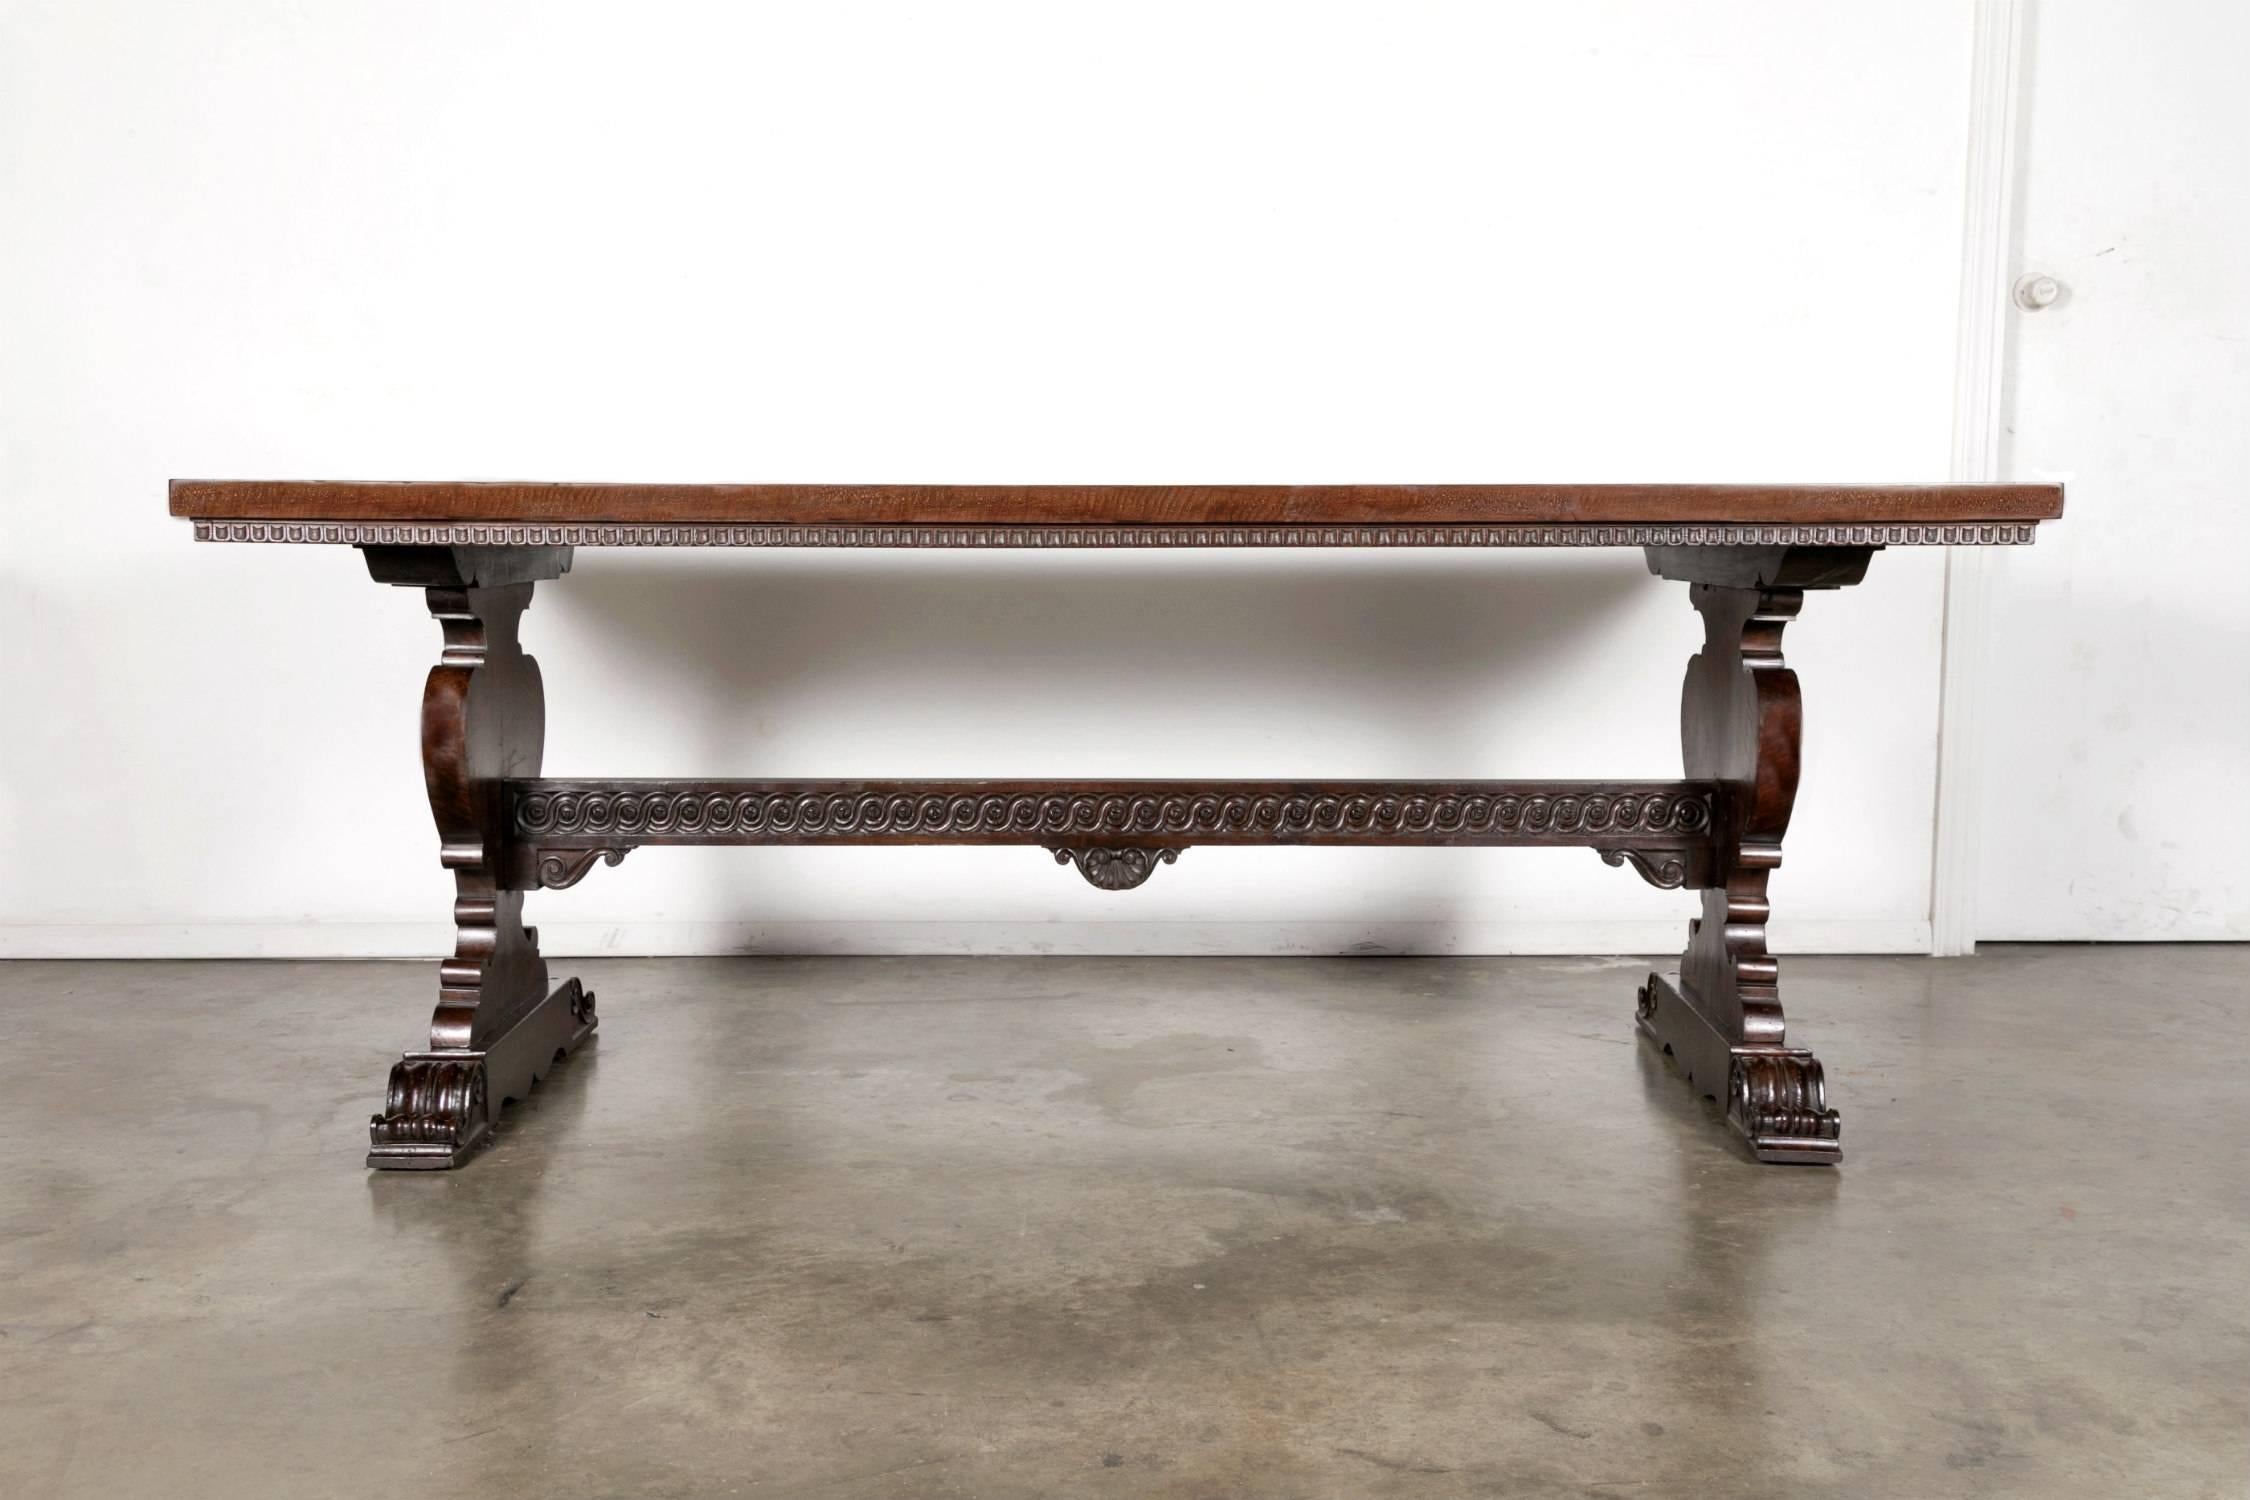 19th century Baroque style trestle table handcrafted of solid walnut by talented artisans near Florence, Italy. This very handsome Tuscany table has a rectangular top with a fruitwood marquetry band and carved molded border. Raised by intricately